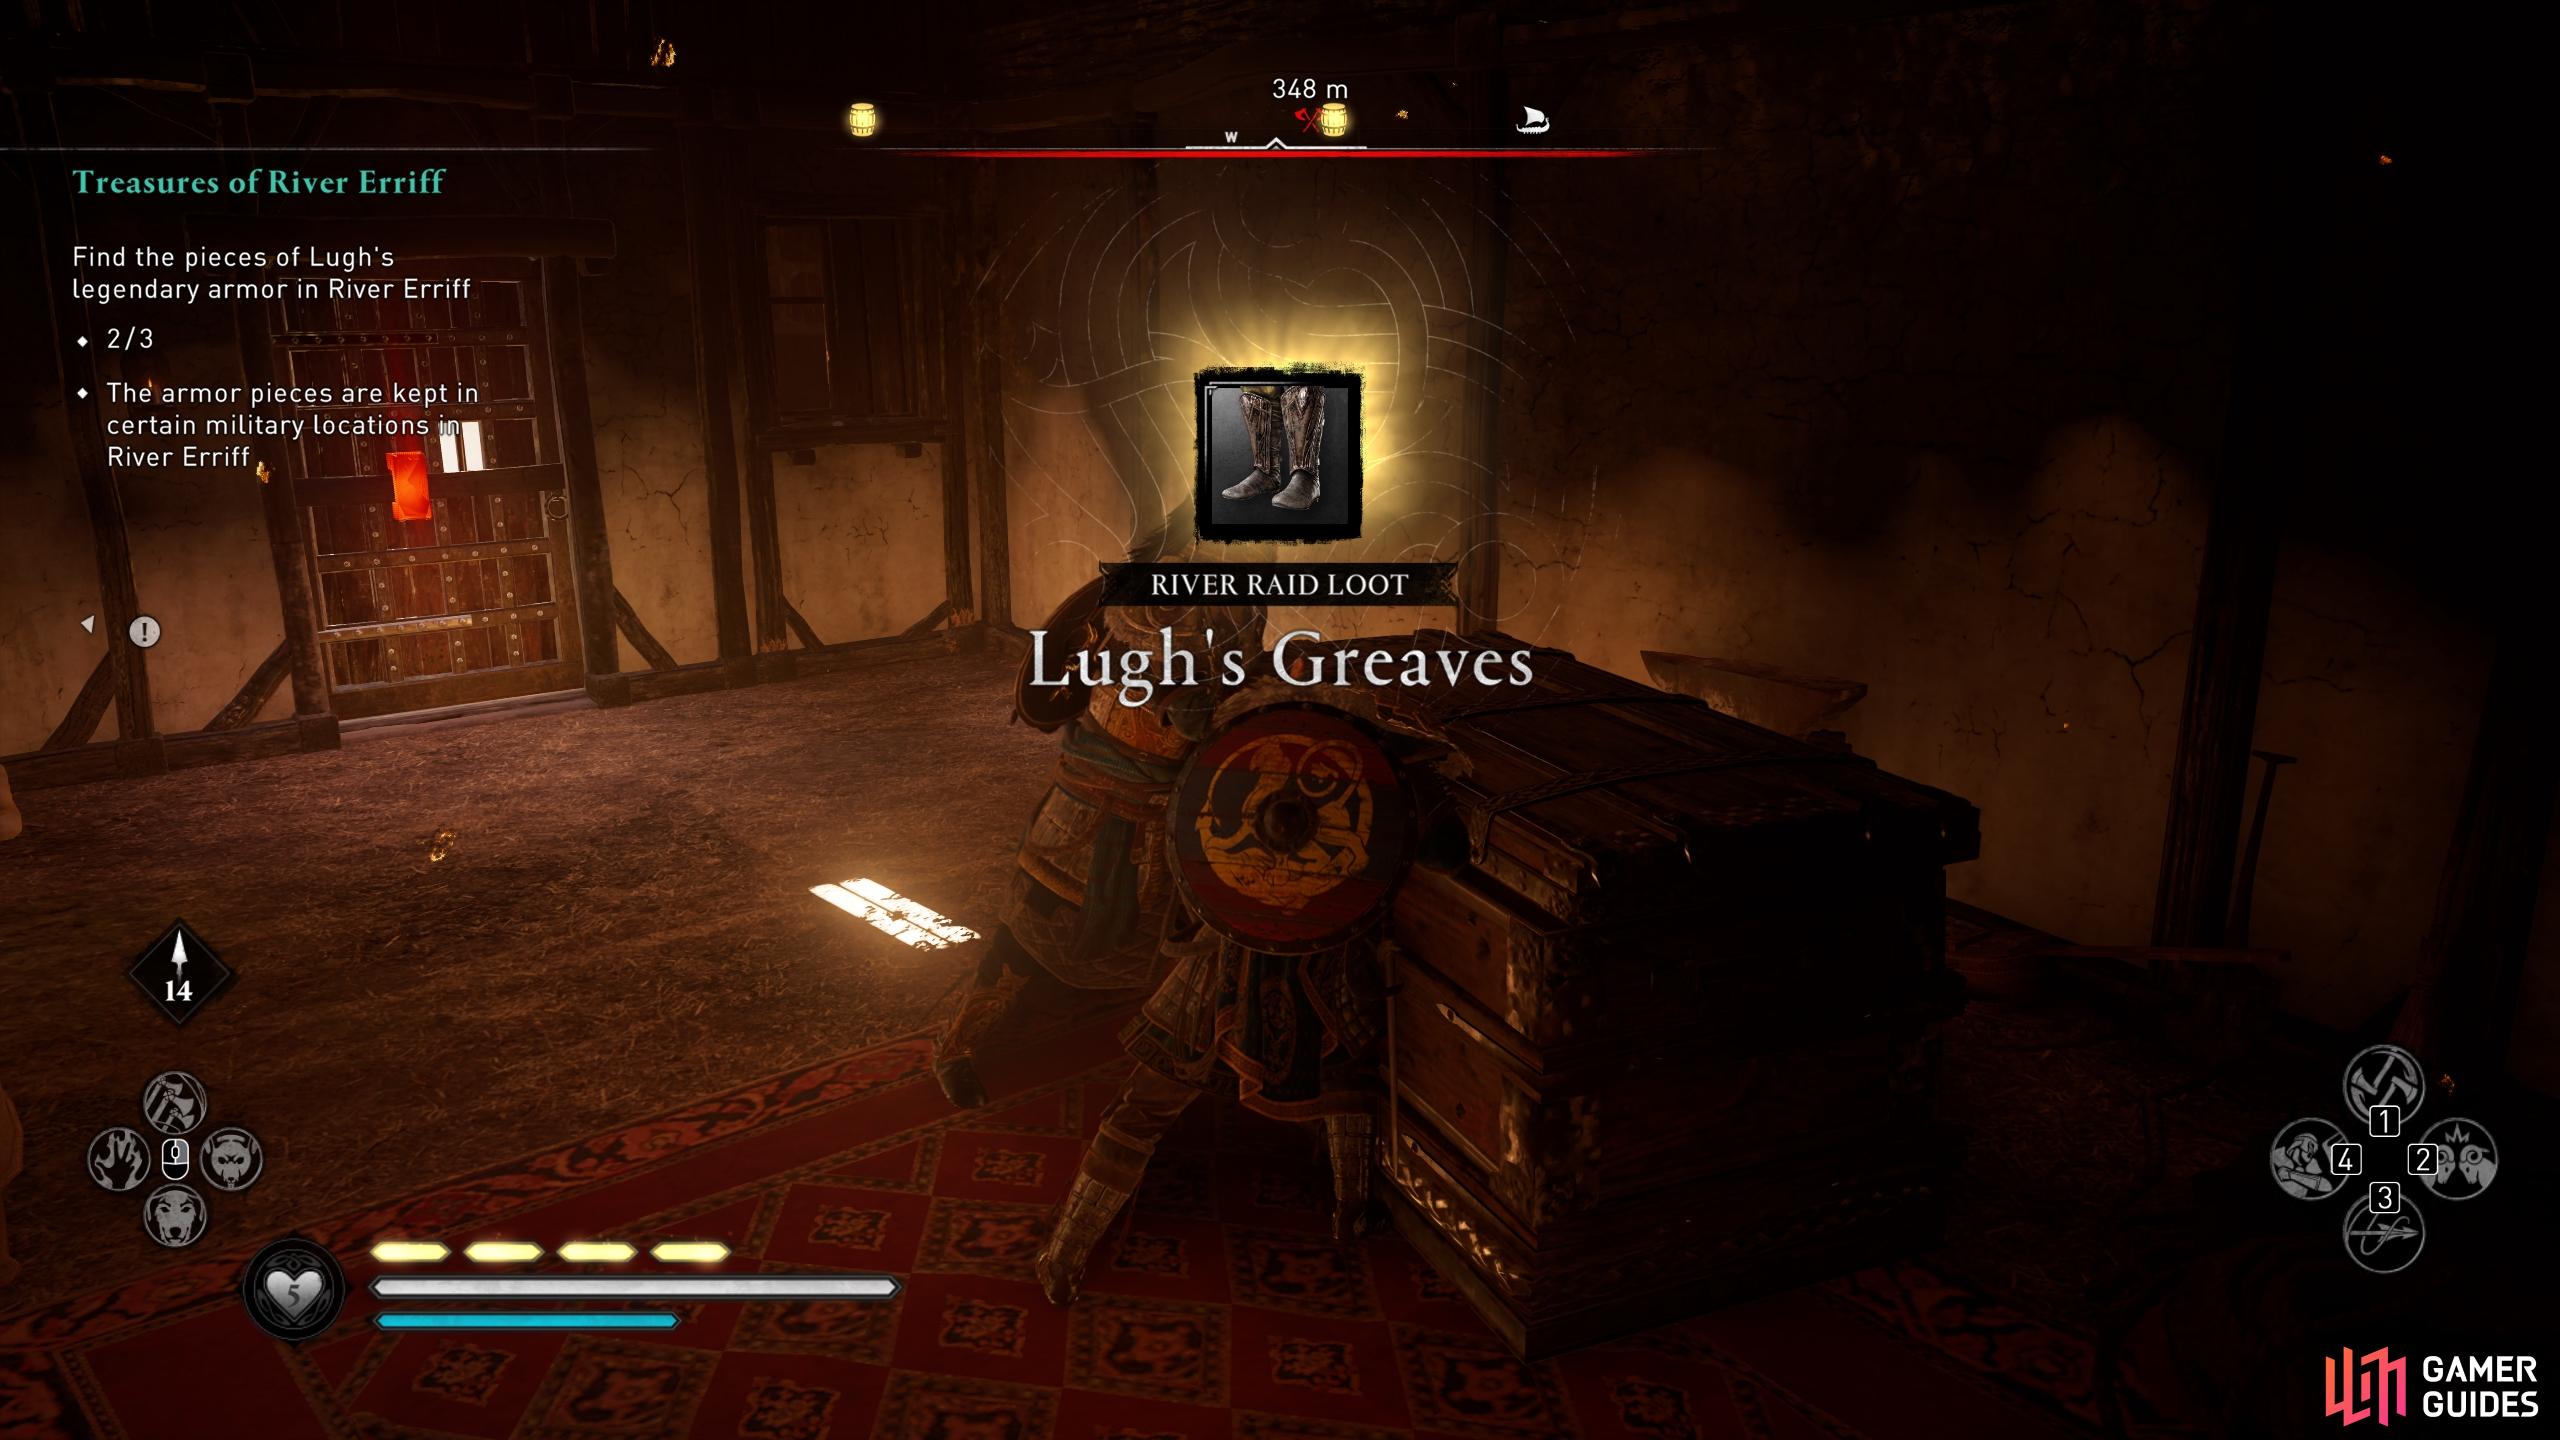 Youll find Lughs Greaves in a regular wealth chest.